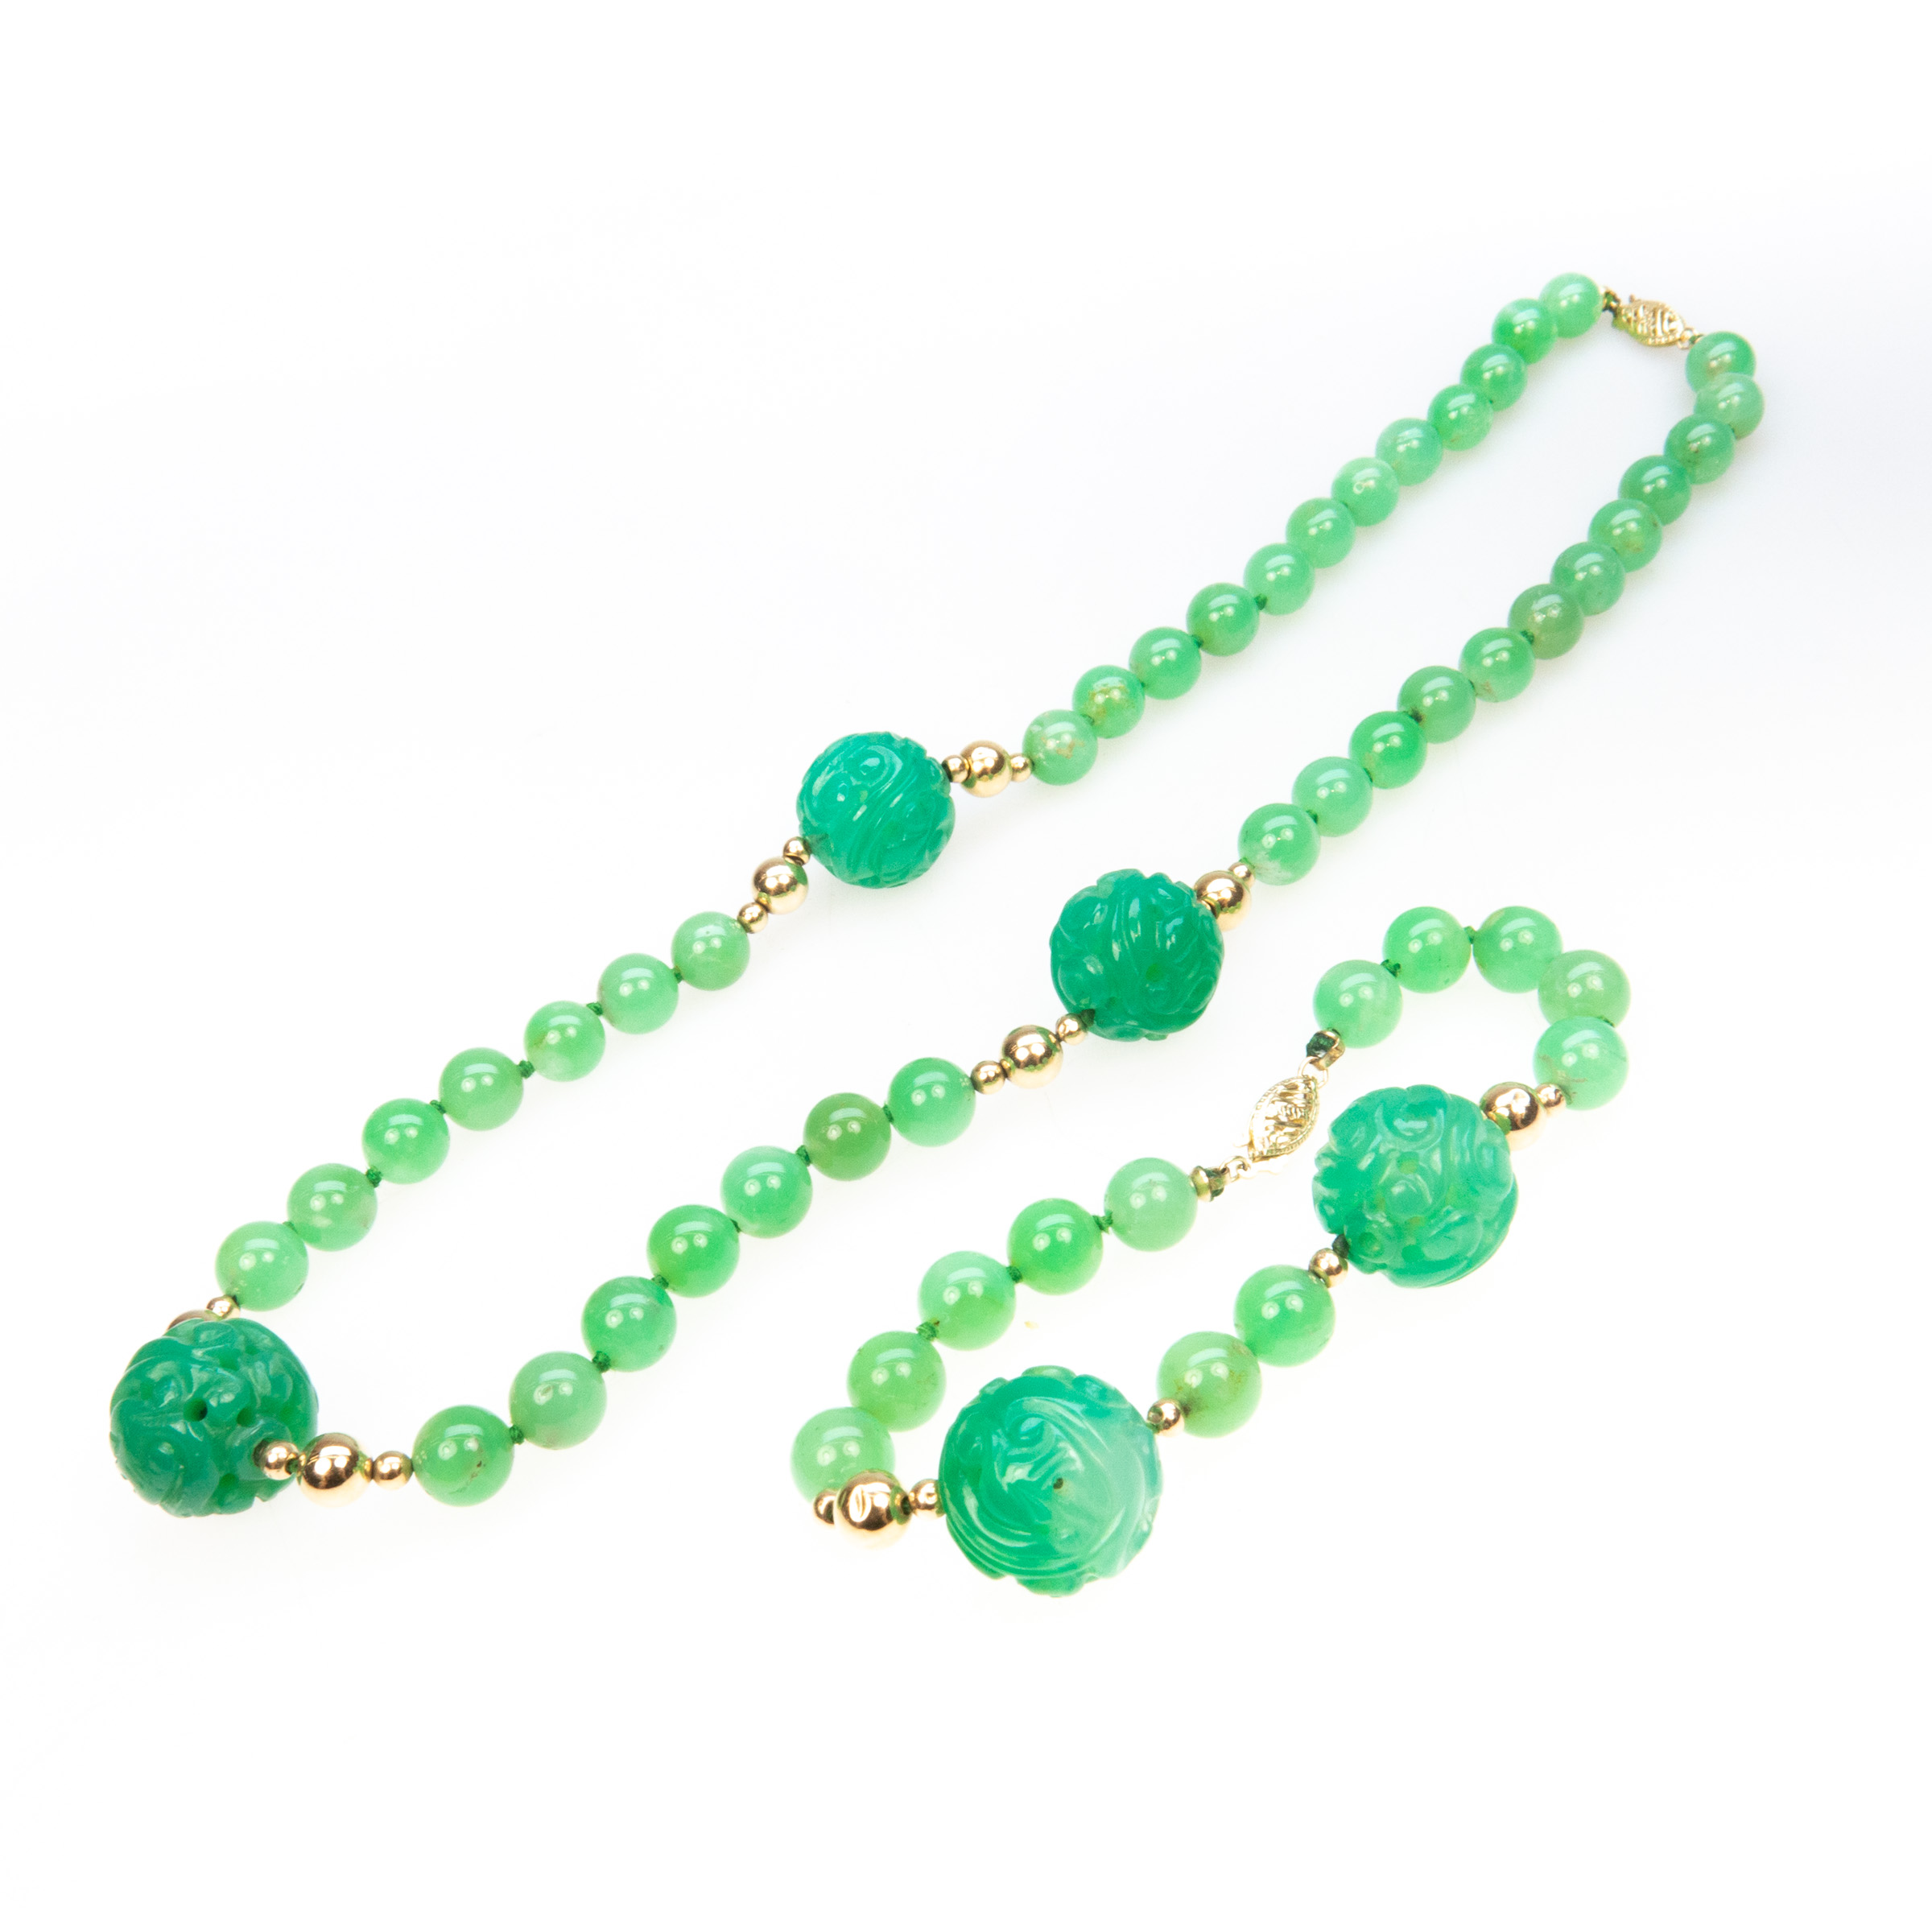 Chrysoprase Bead And Carved Bead Necklace And Bracelet